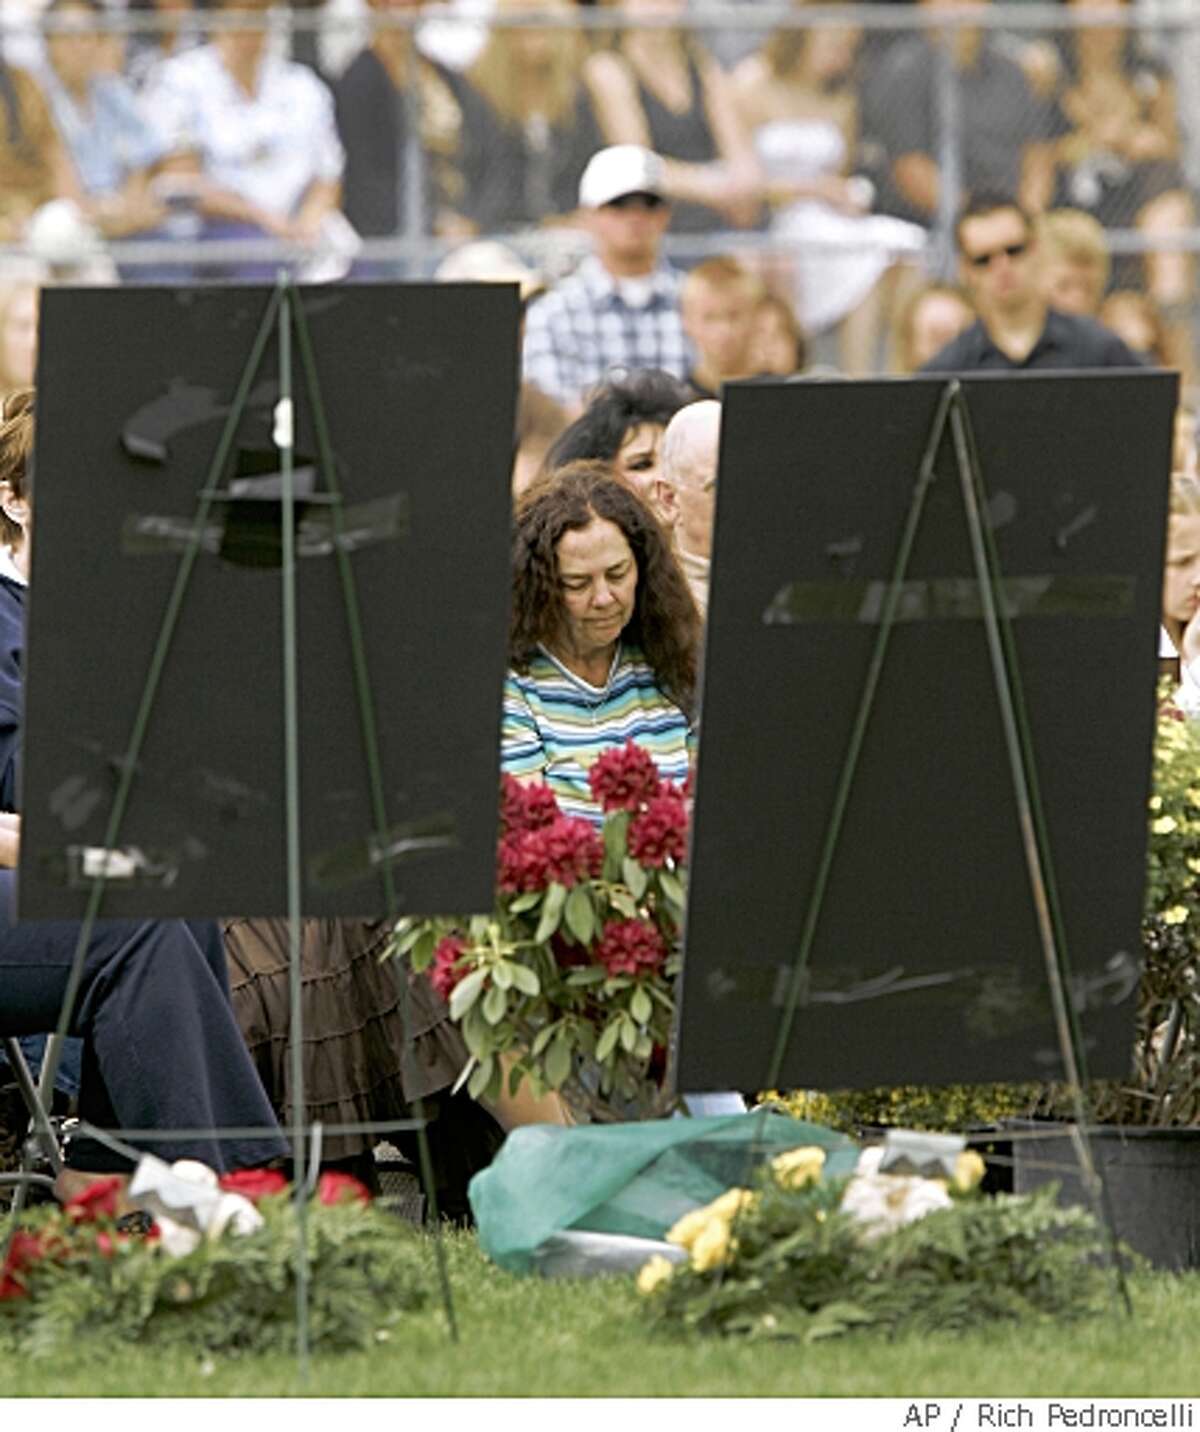 Jodie Carrigan is seen between a pair of photographs of her deceased children during a memorial service at football field at Chester Junior-Senior High School in Chester, Calif., Tuesday, May 20, 2008. On Mother's day Jodie Carrigan found the bodies of her daughter Jenny, 18, and a friend, Steven Furtado,18, at the Carrigan home in Chester. Later the same day Jodie's son, Billy, 20, was fatally injured in a car accident while returning home from Berkeley. Reyes Carrillo, 18, a classmate and former boyfriend of Jenny Carrigan, has been charged in the murders.(AP Photo/Rich Pedroncelli)